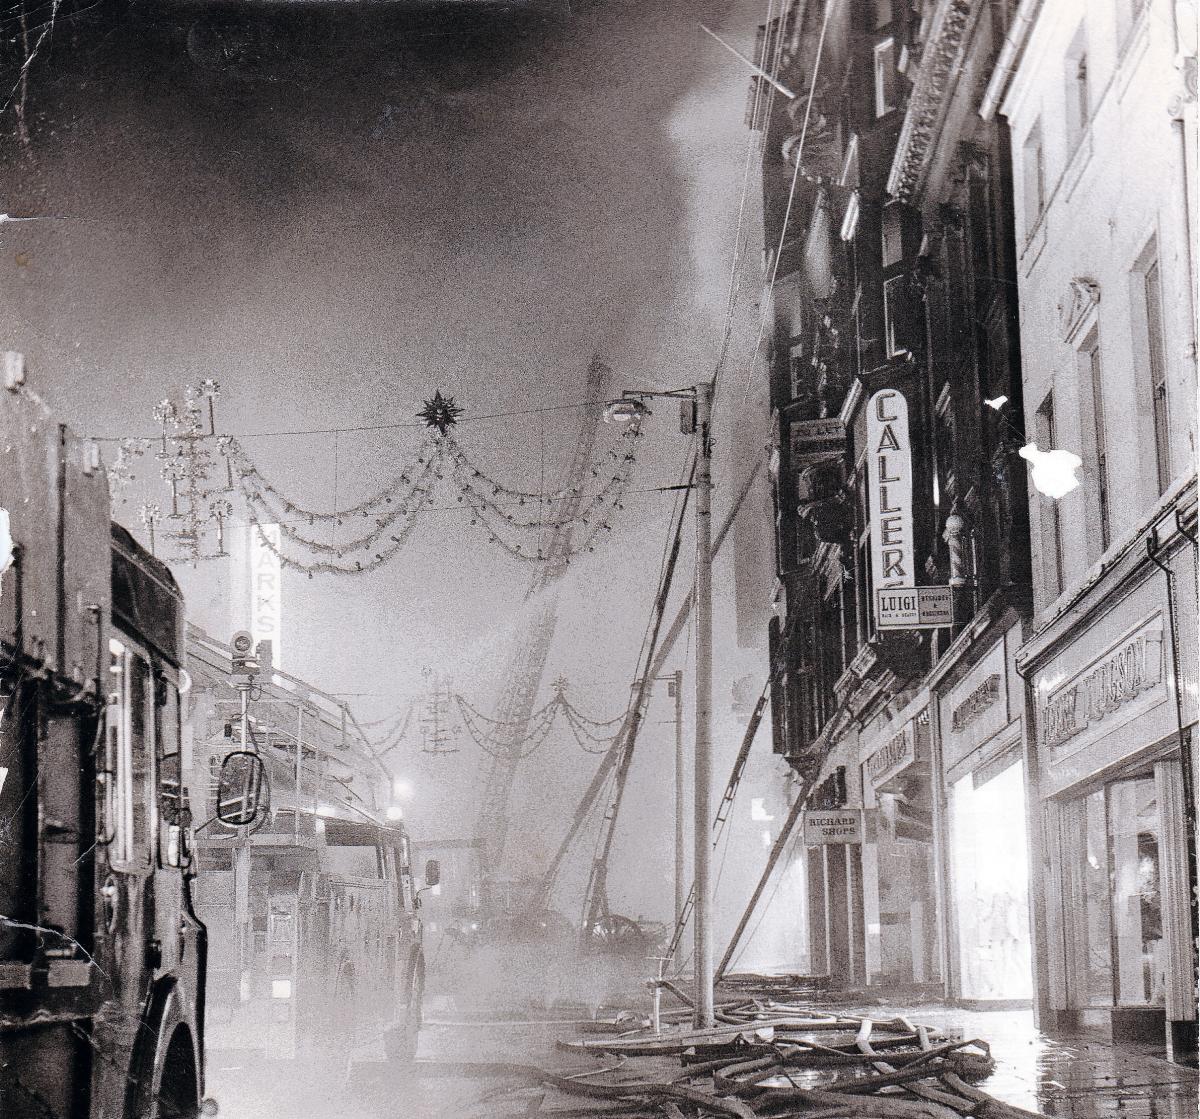 Fighting Fire: Callers Furniture store of Northumberland Street, set alight by its own Christmas display in 1969, took around five hours to extinguish. The store was later rebuilt and the building still stands today